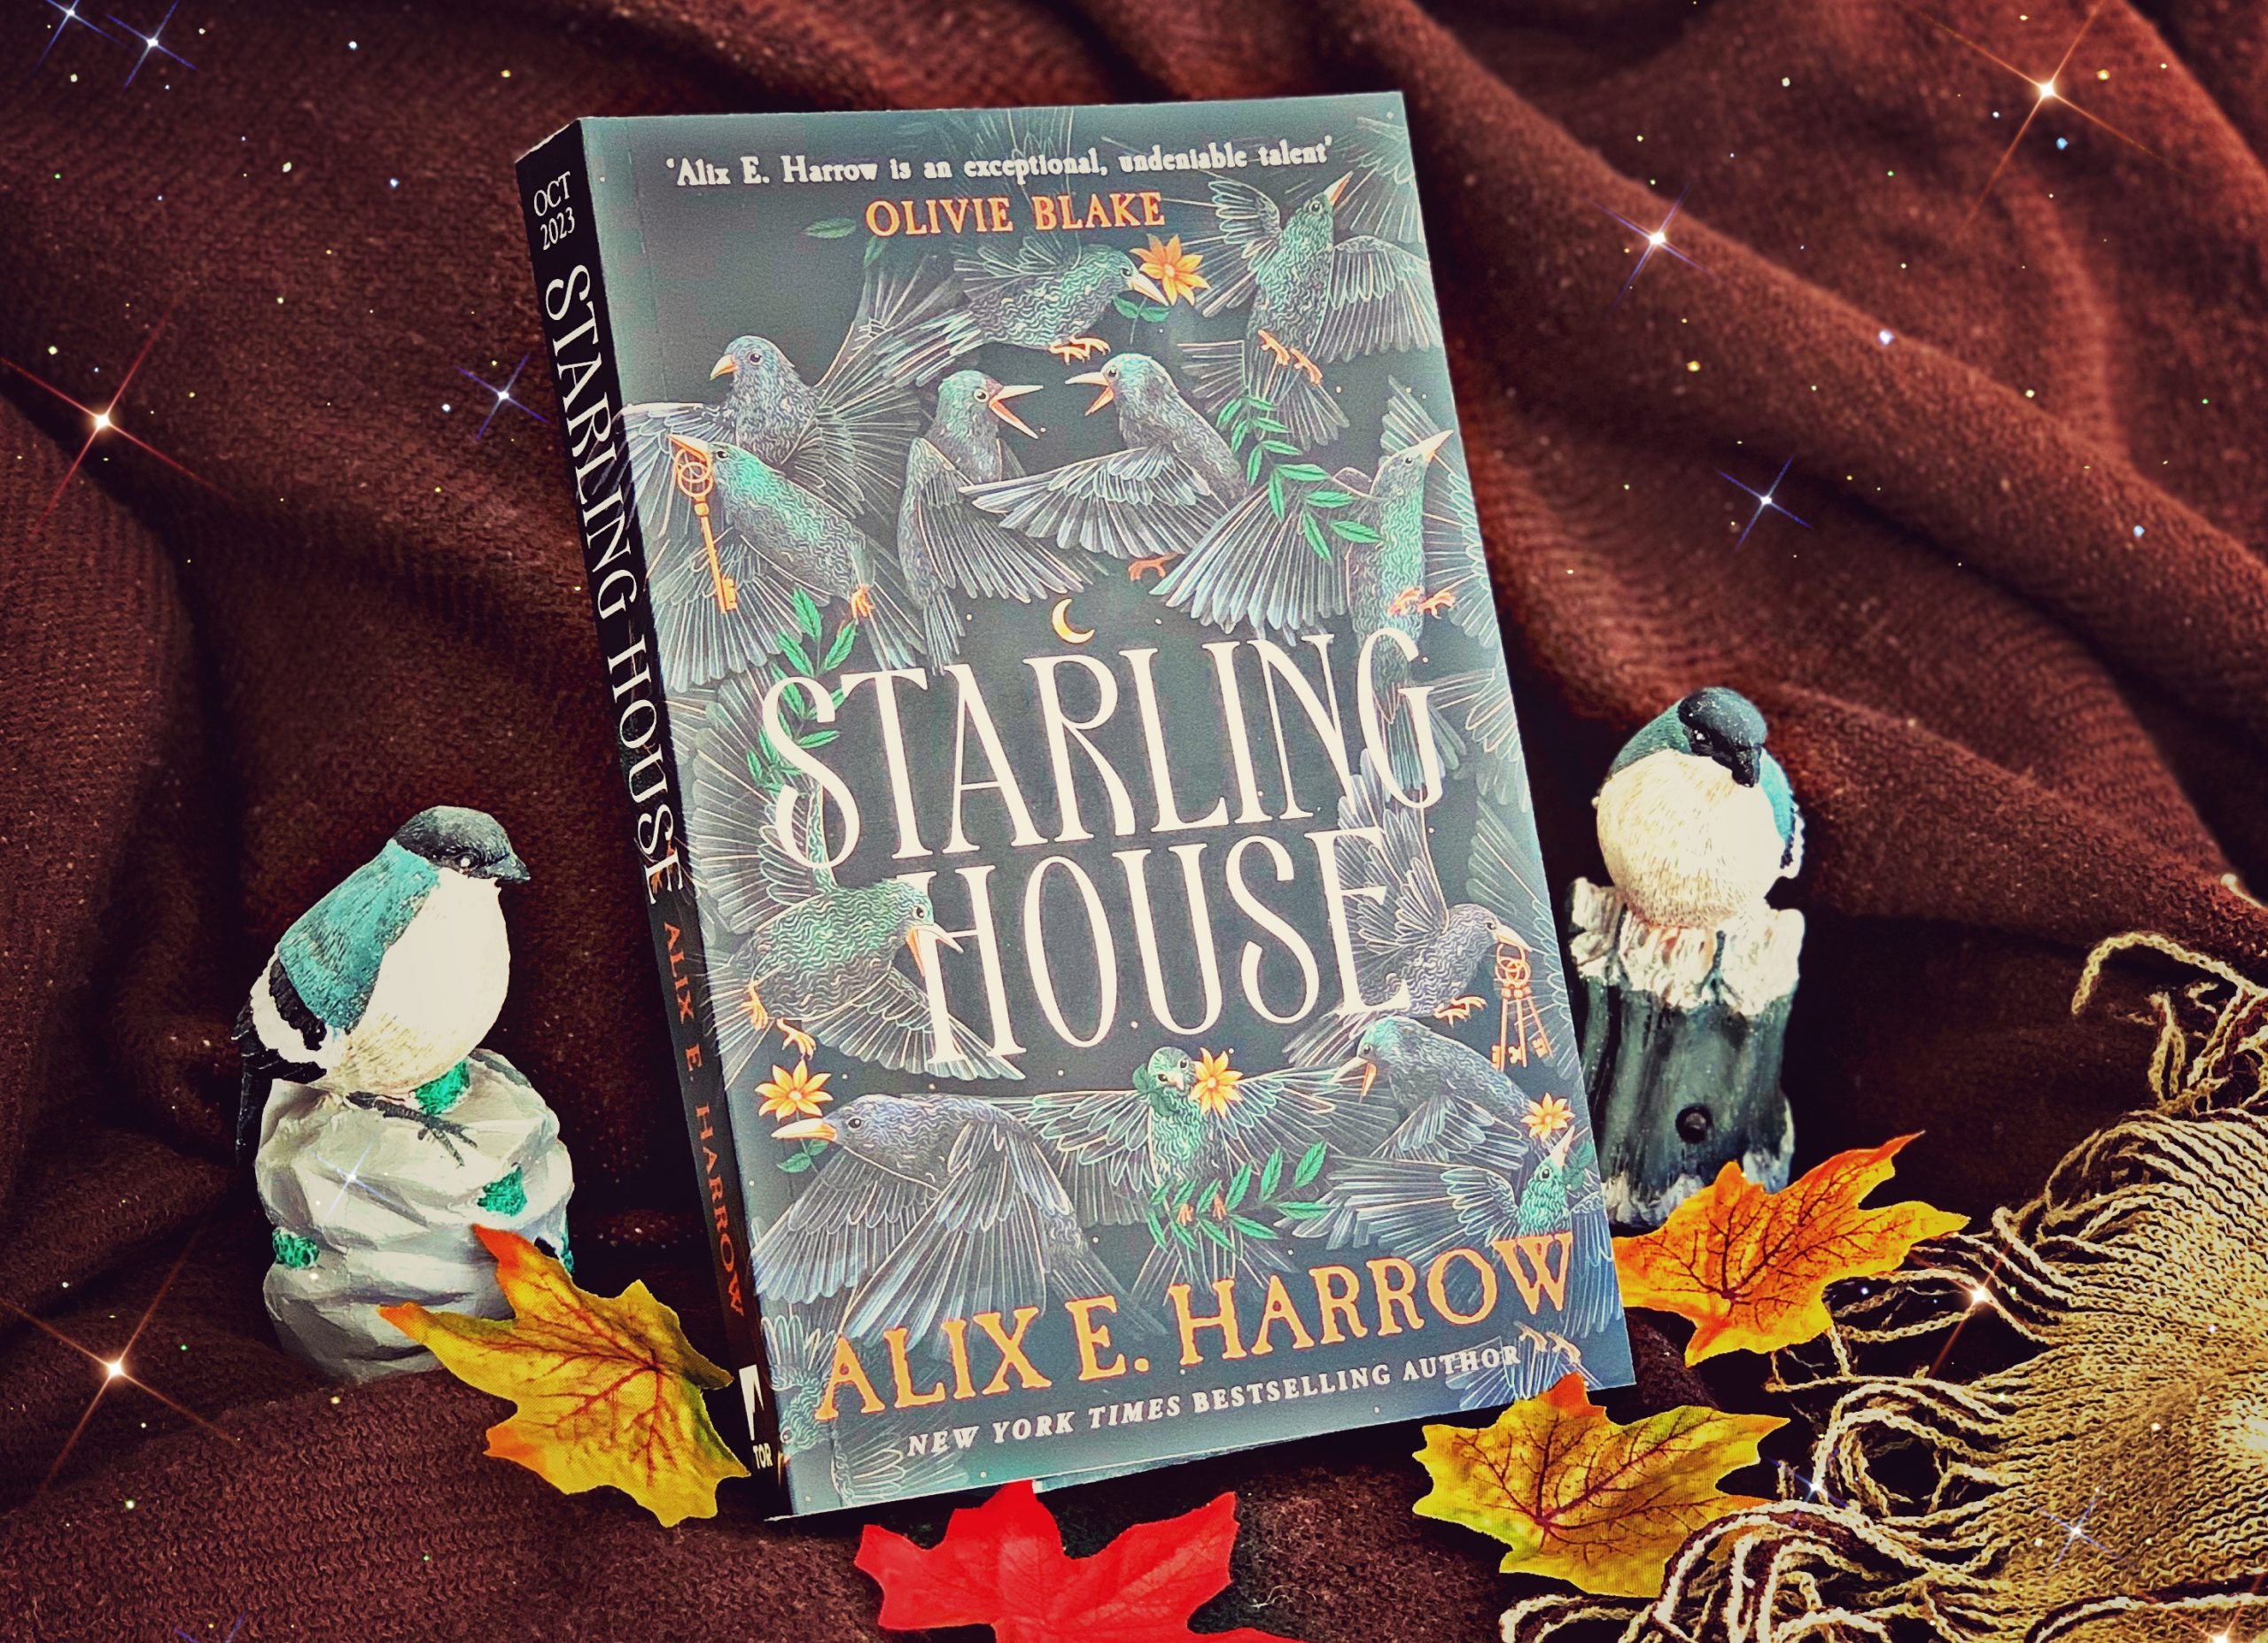 STARLING HOUSE by Alix E Harrow (BUDDY READ BOOK REVIEW)